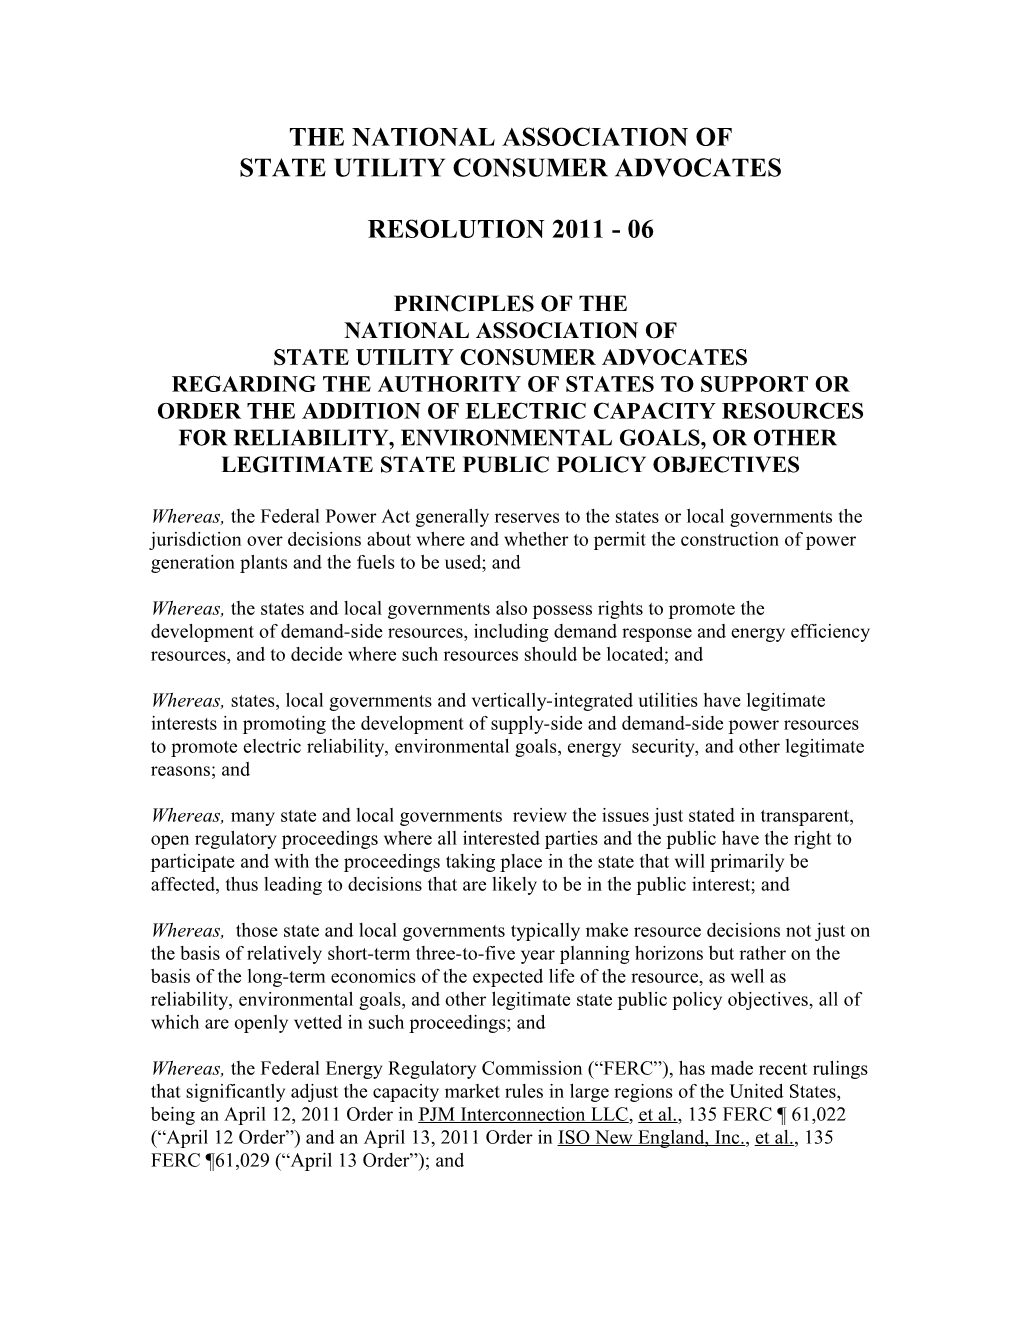 Resolution Re State Capacity Rights - 10-14 Version 10/17 Edits (00149728)